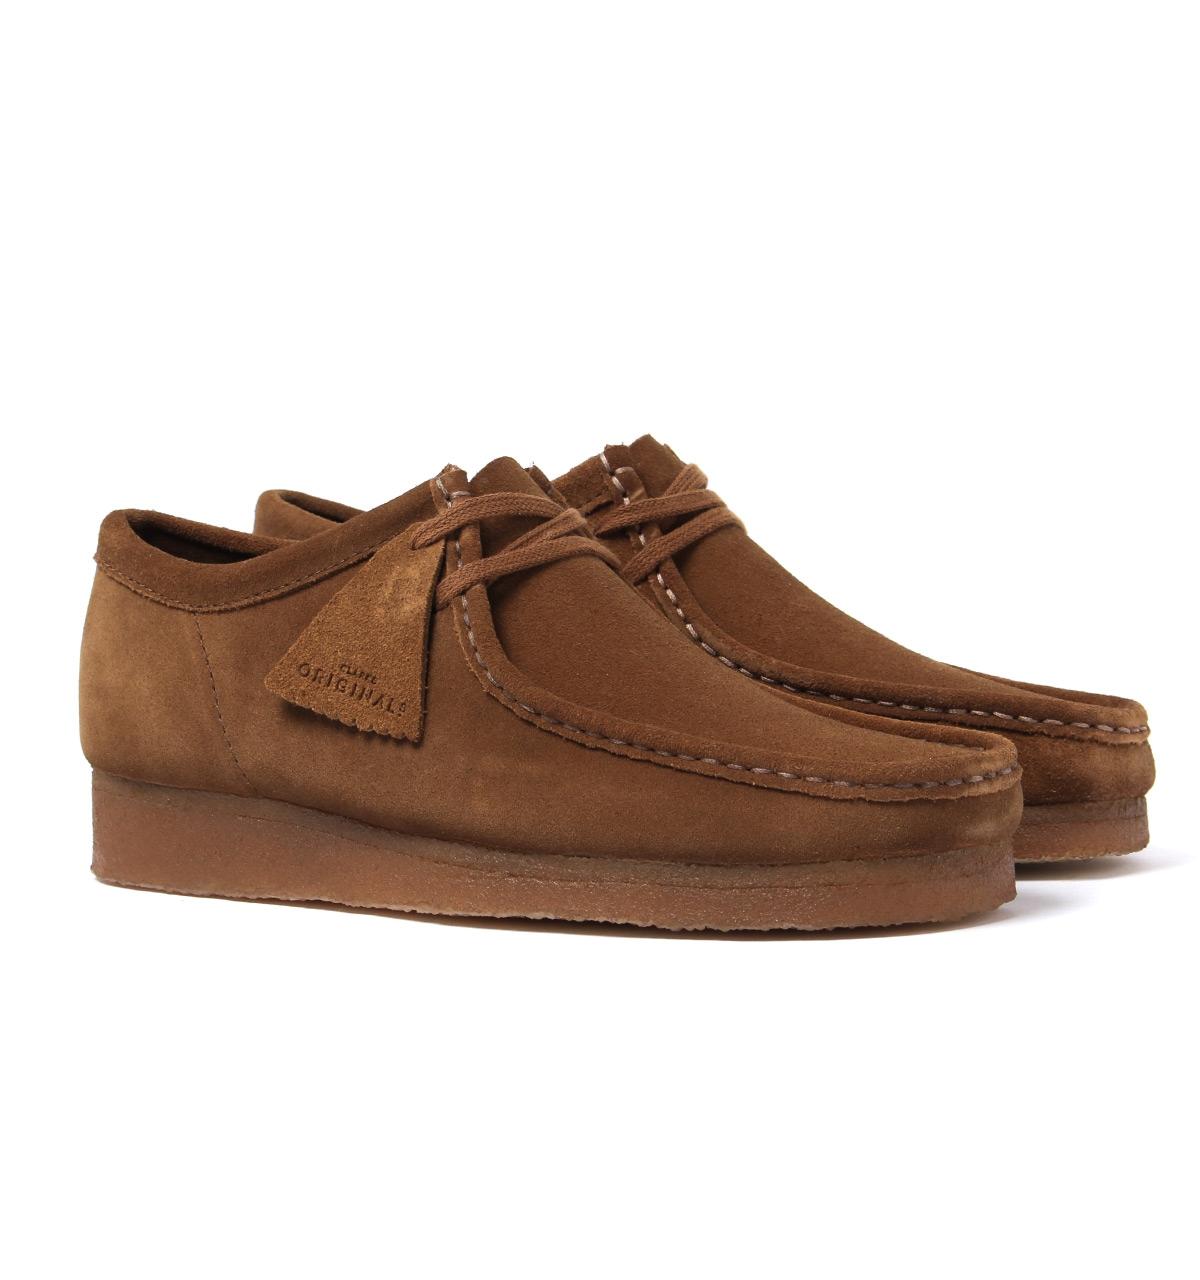 Lyst - Clarks Cola Brown Suede Wallabee Low-cut Moccasin Boots in Brown ...